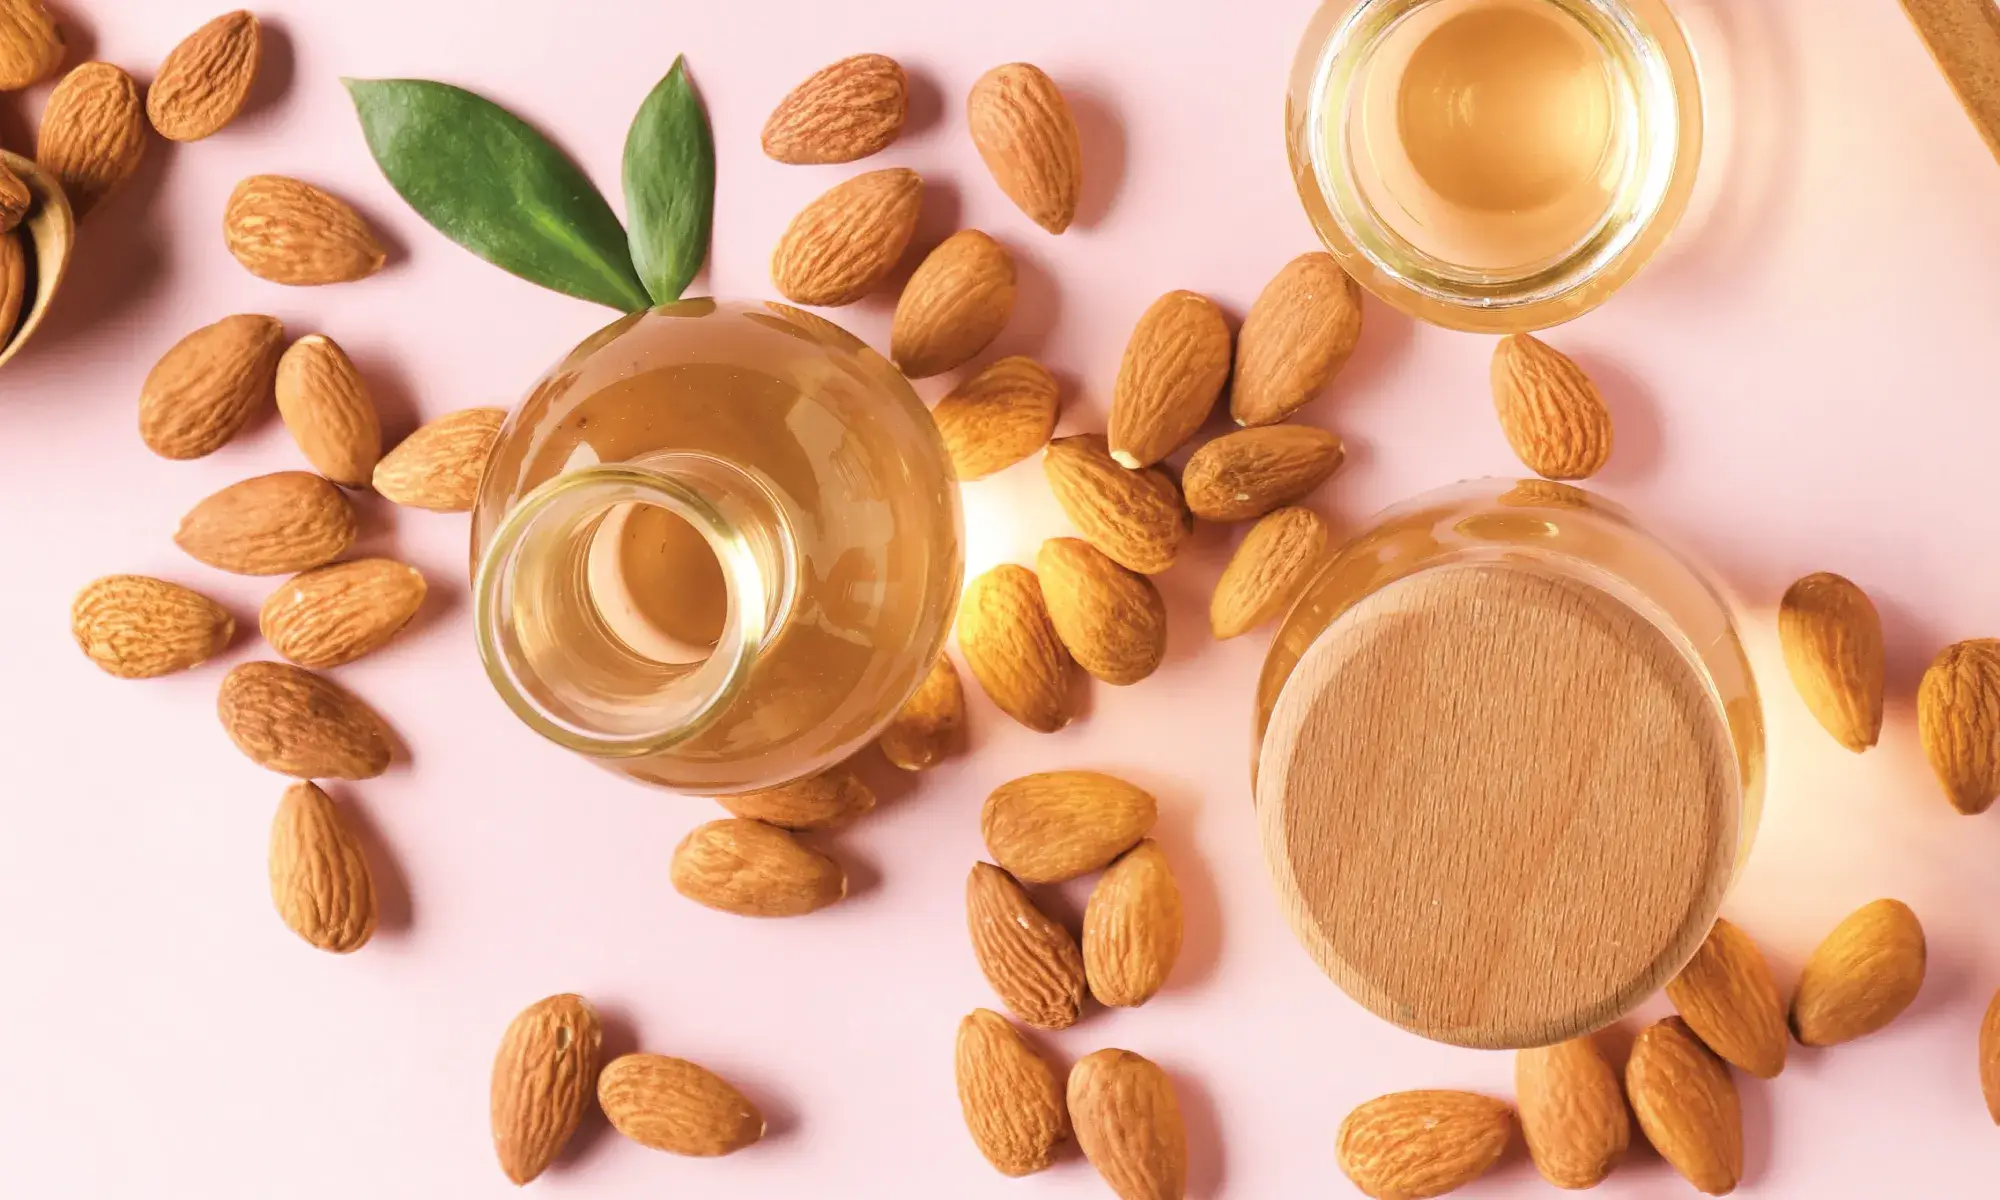 How To Use Almond Oil For Dark Underarms?